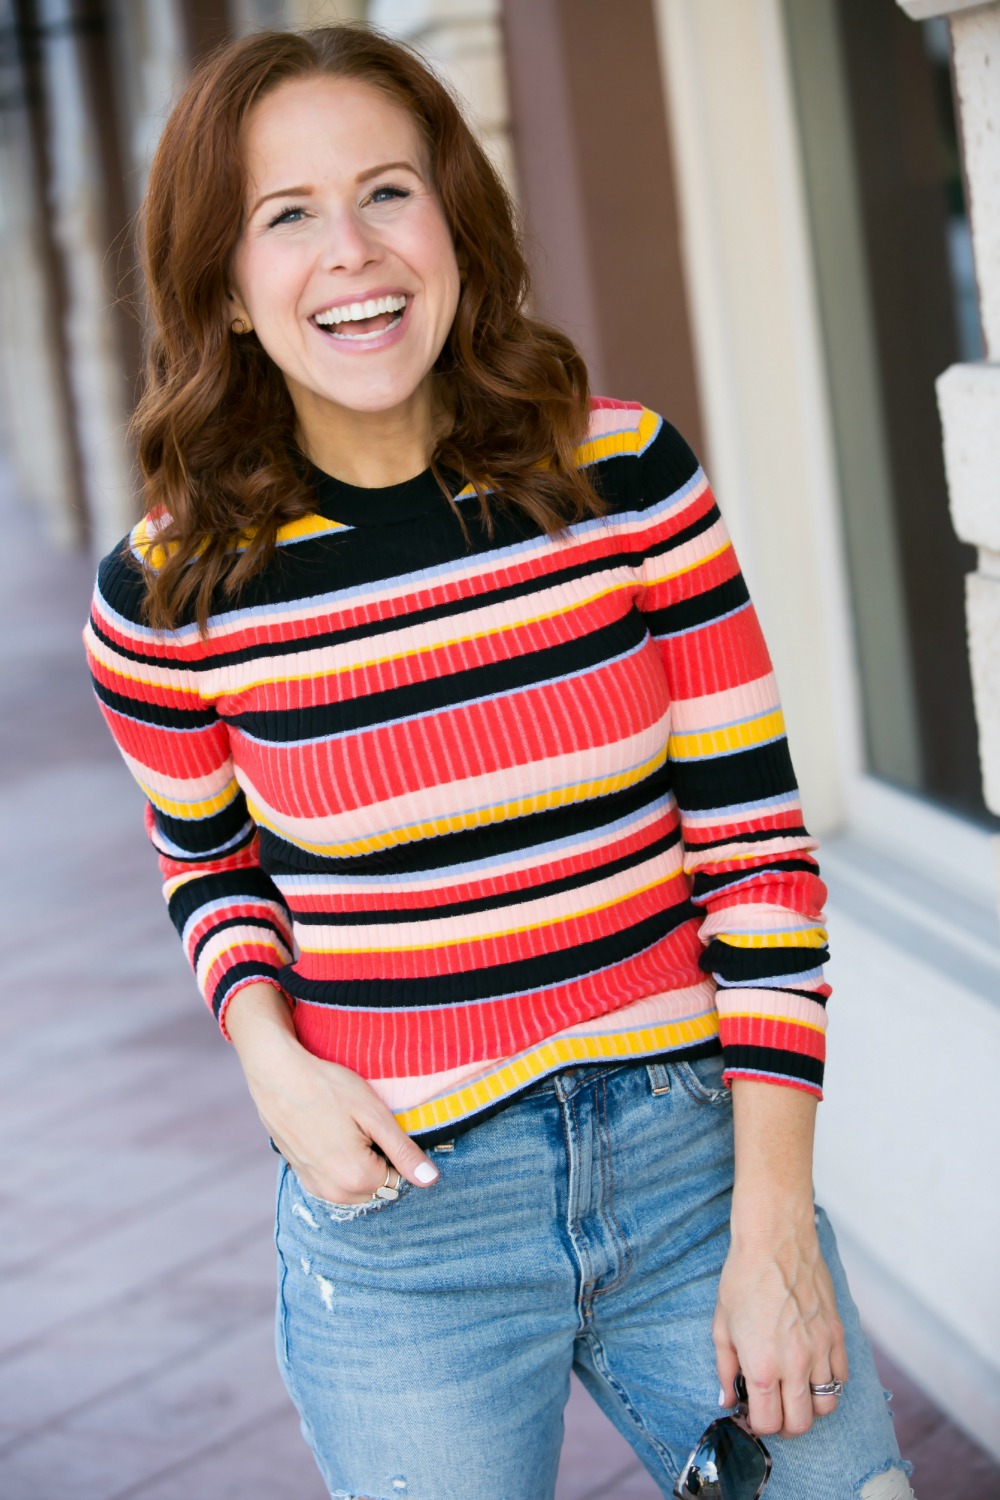 The easiest, and budget friendly outfit to look pulled together FAST // #falloutfit #momstyle #momuniform #rainbow | 90s Vibes | Target | Fall weekend uniform | The Striped Ribbed Sweater is Back featured by top Florida fashion blog the modern savvy 